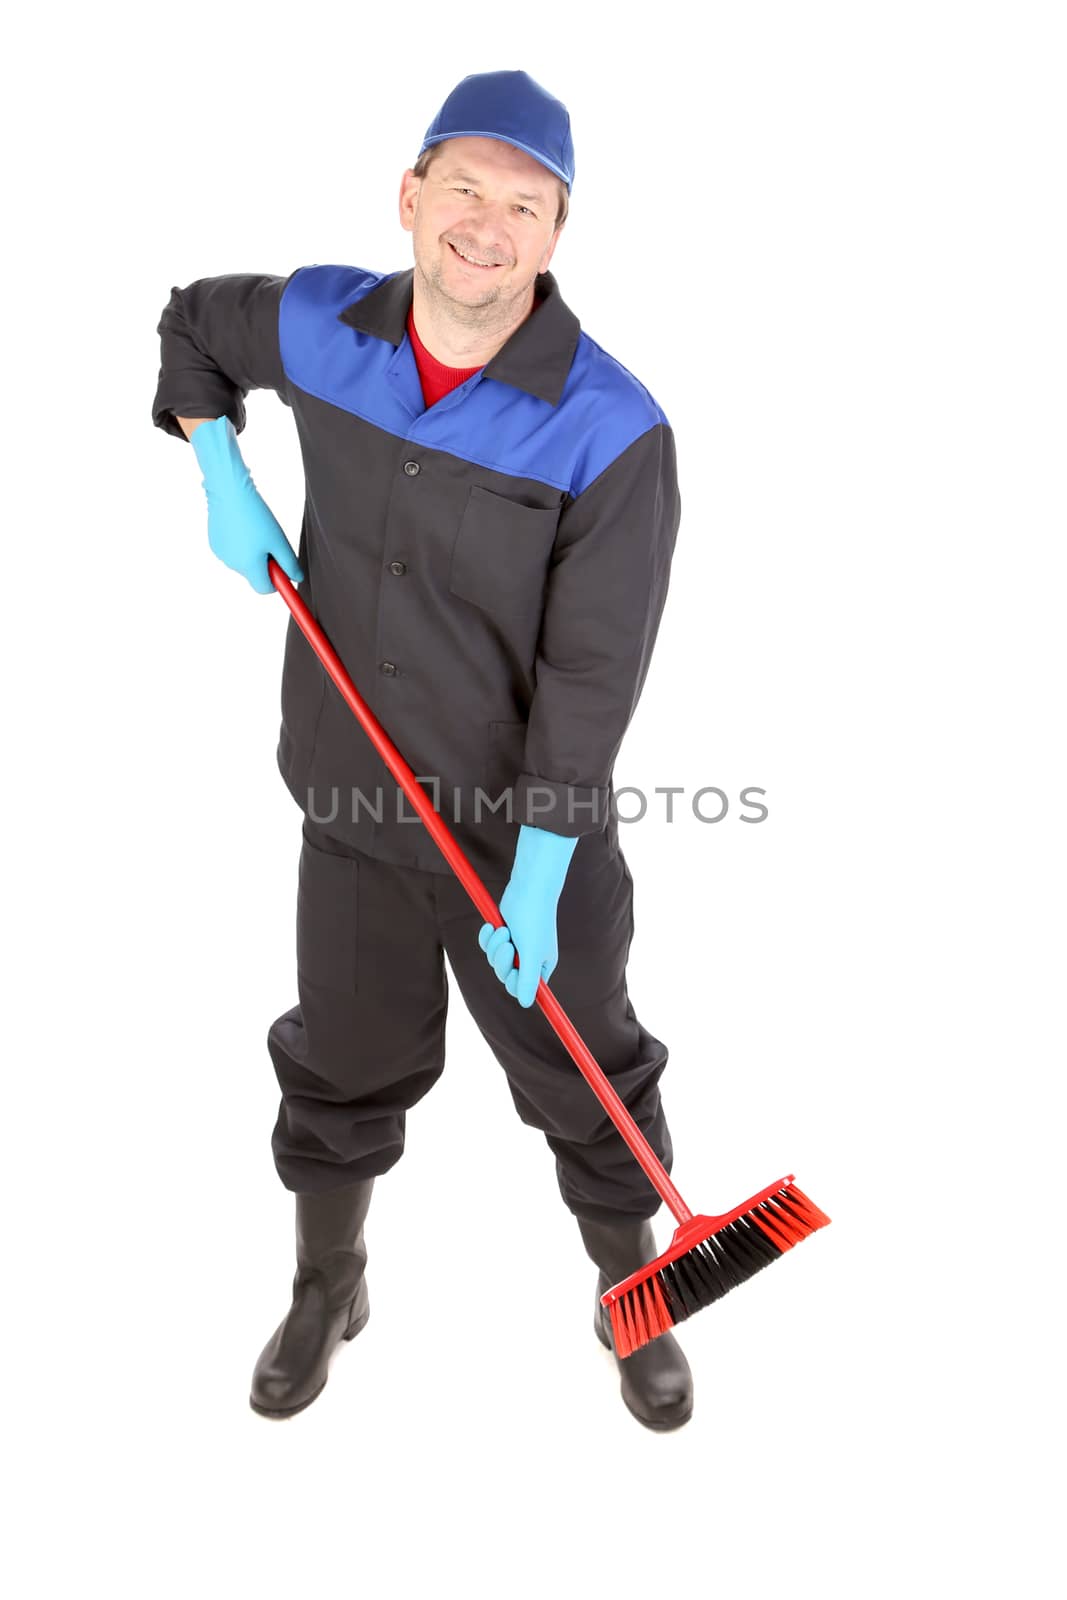 Man with cleaning broom. Isolated on a white background.